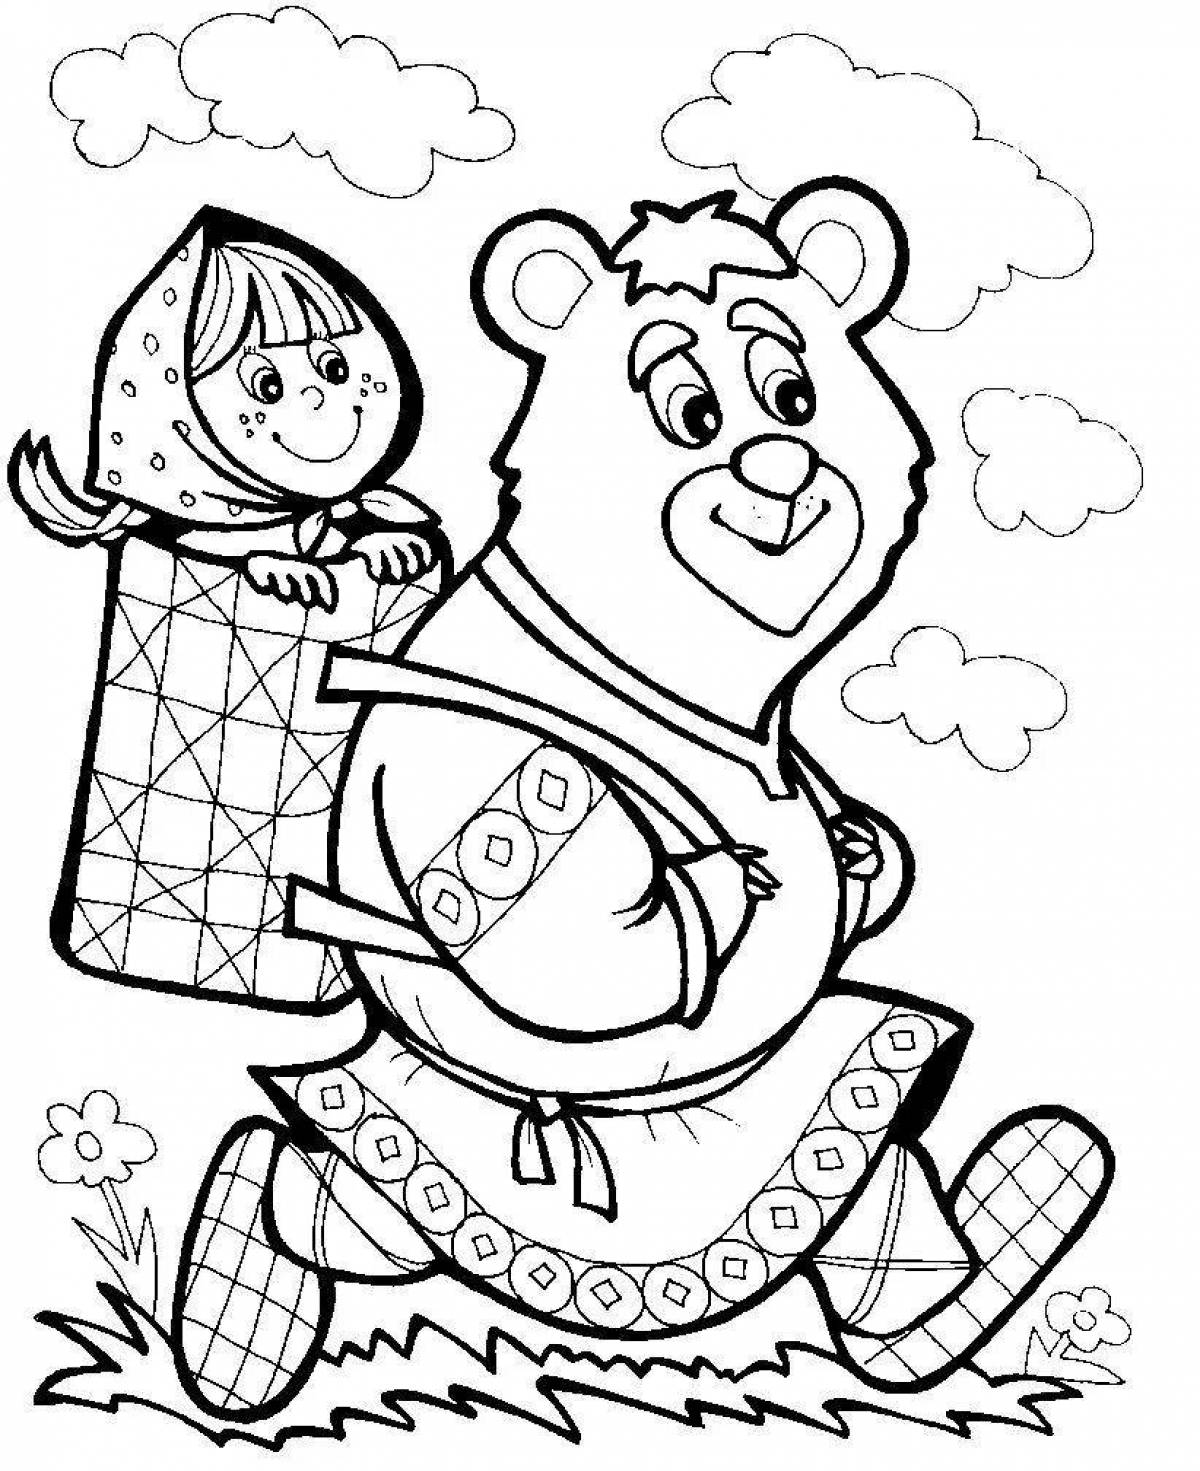 Inspiring coloring book heroes of fairy tales for 6 7 years